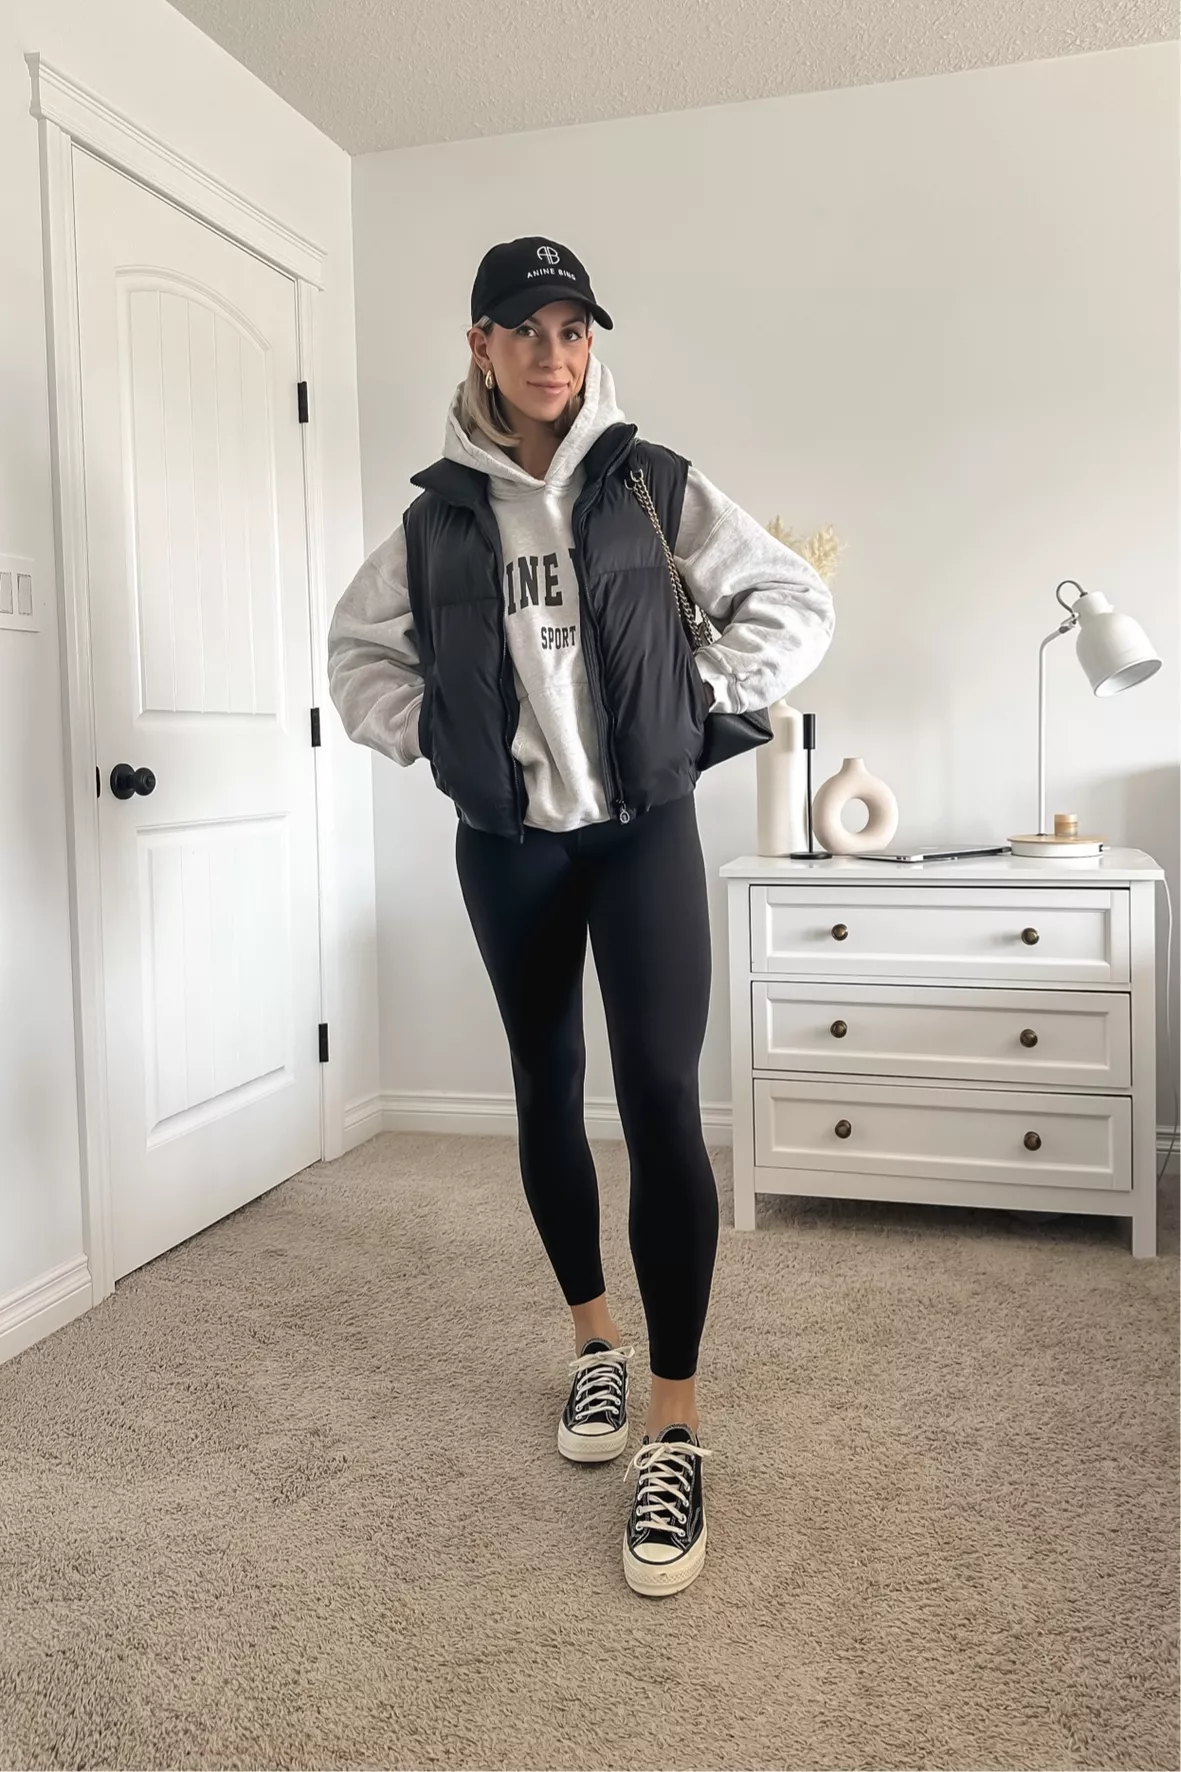 life with aco, vans sneakers, lululemon align leggings - Life with A.Co by  Amanda L. Conquer